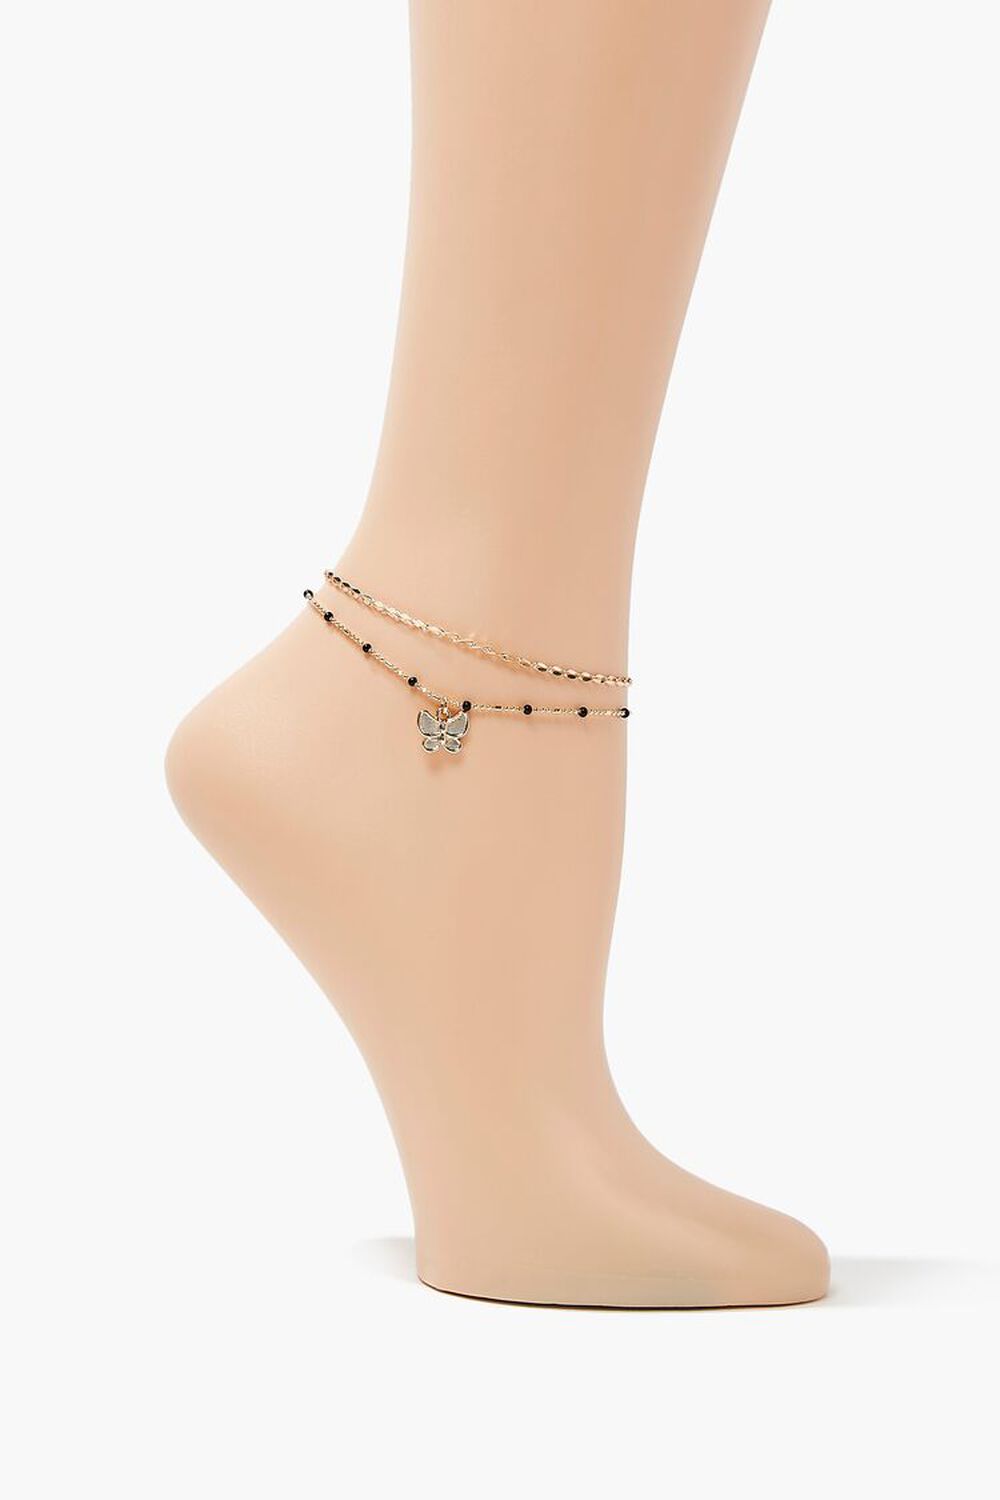 GOLD/BLACK Butterfly Charm Layered Anklet, image 1